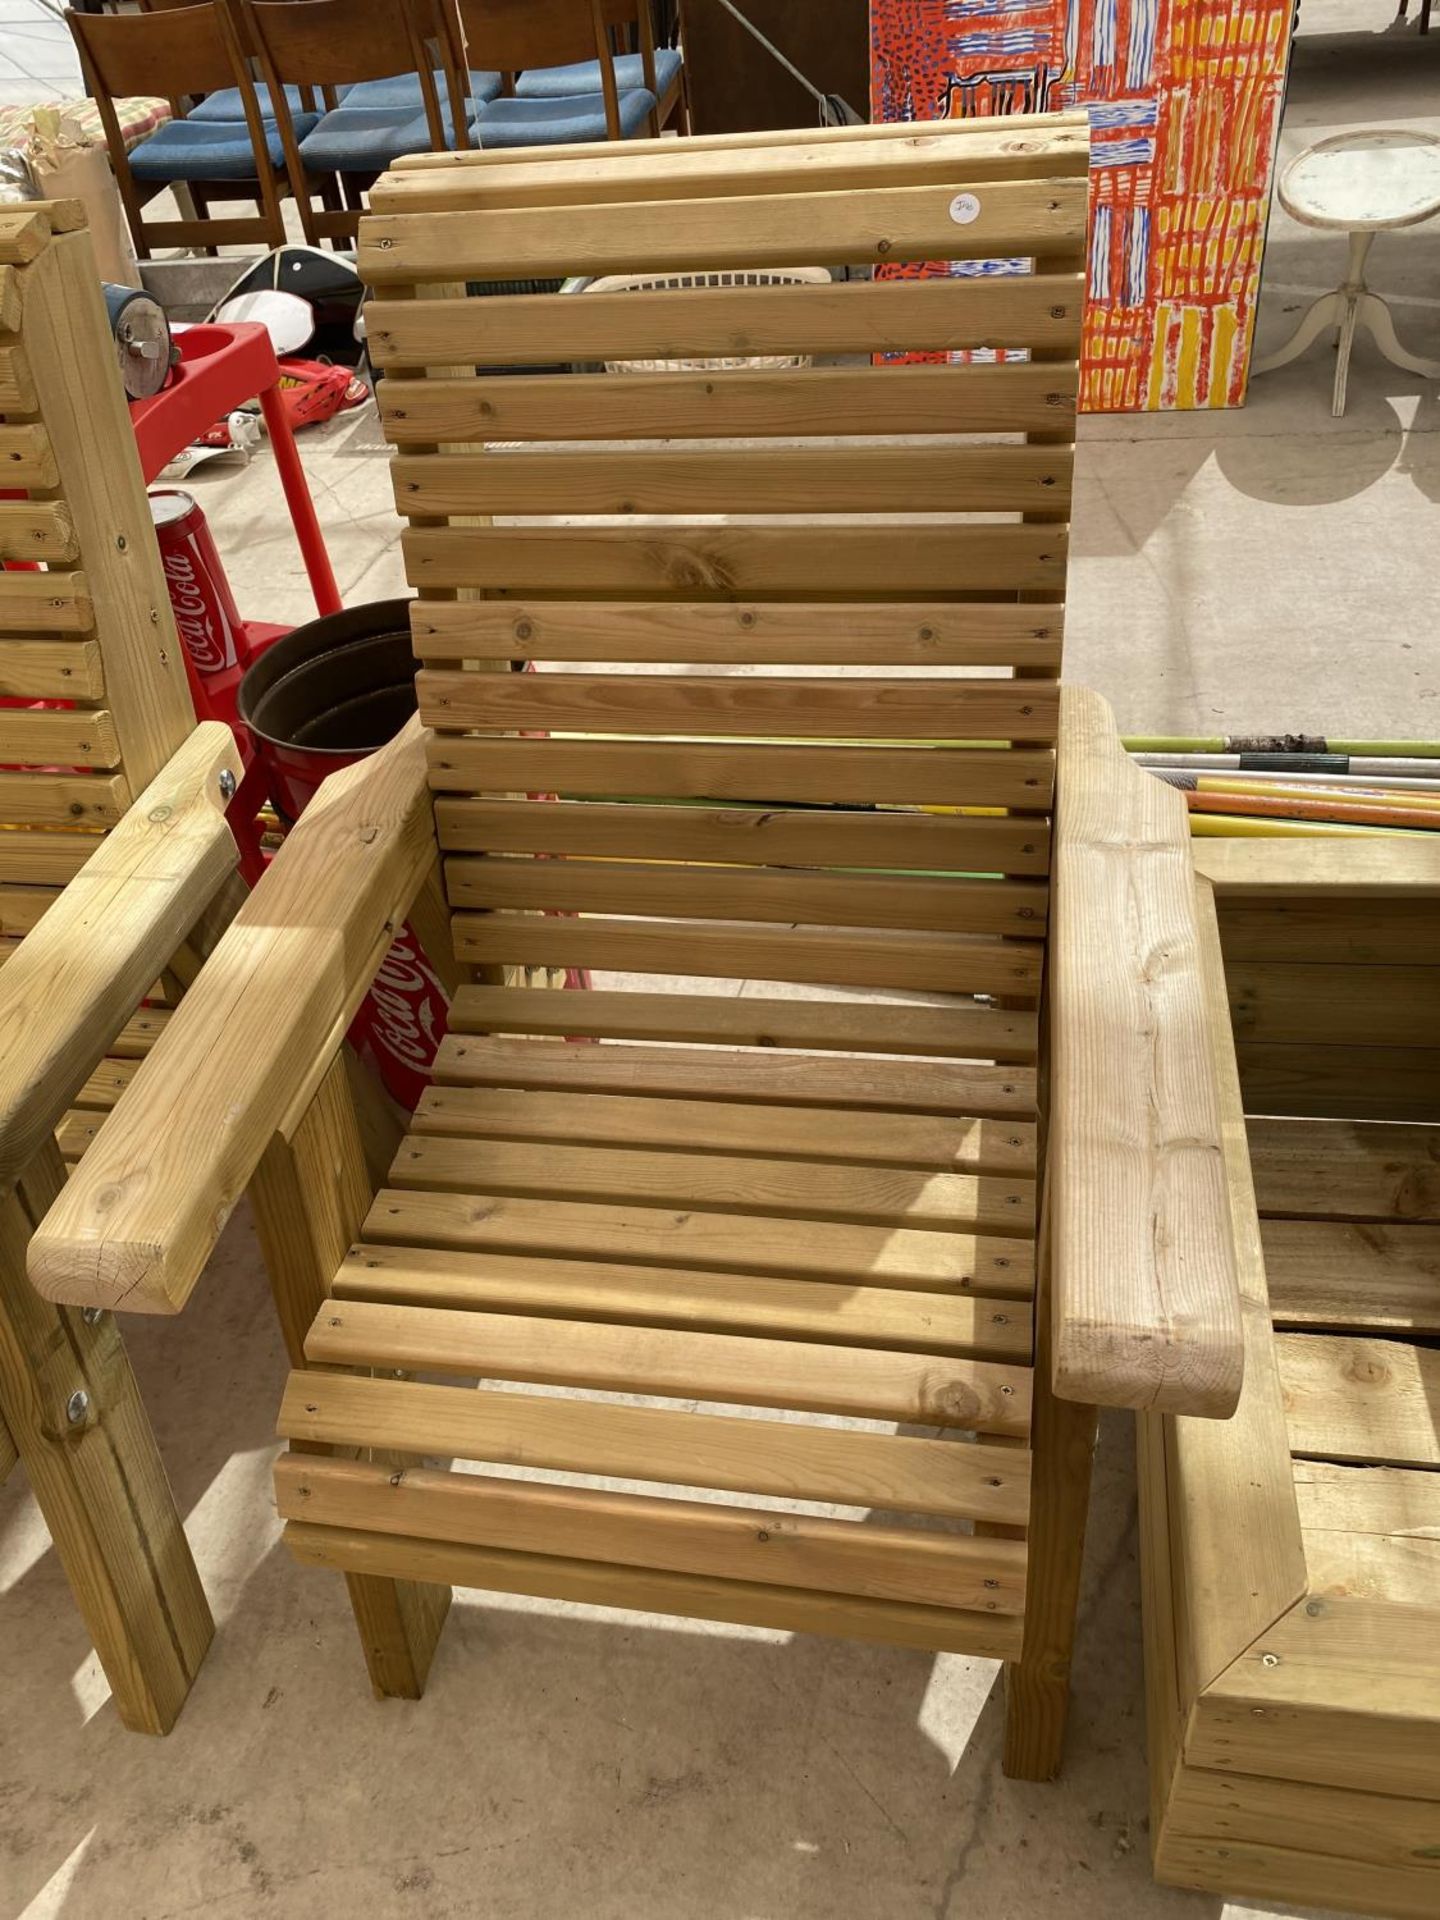 A WOODEN GARDEN FURNITURE SET TO INCLUDE A TWO SEATER BENCH, A CHAIR, A PLANTER AND A SIDE TABLE - Image 4 of 5